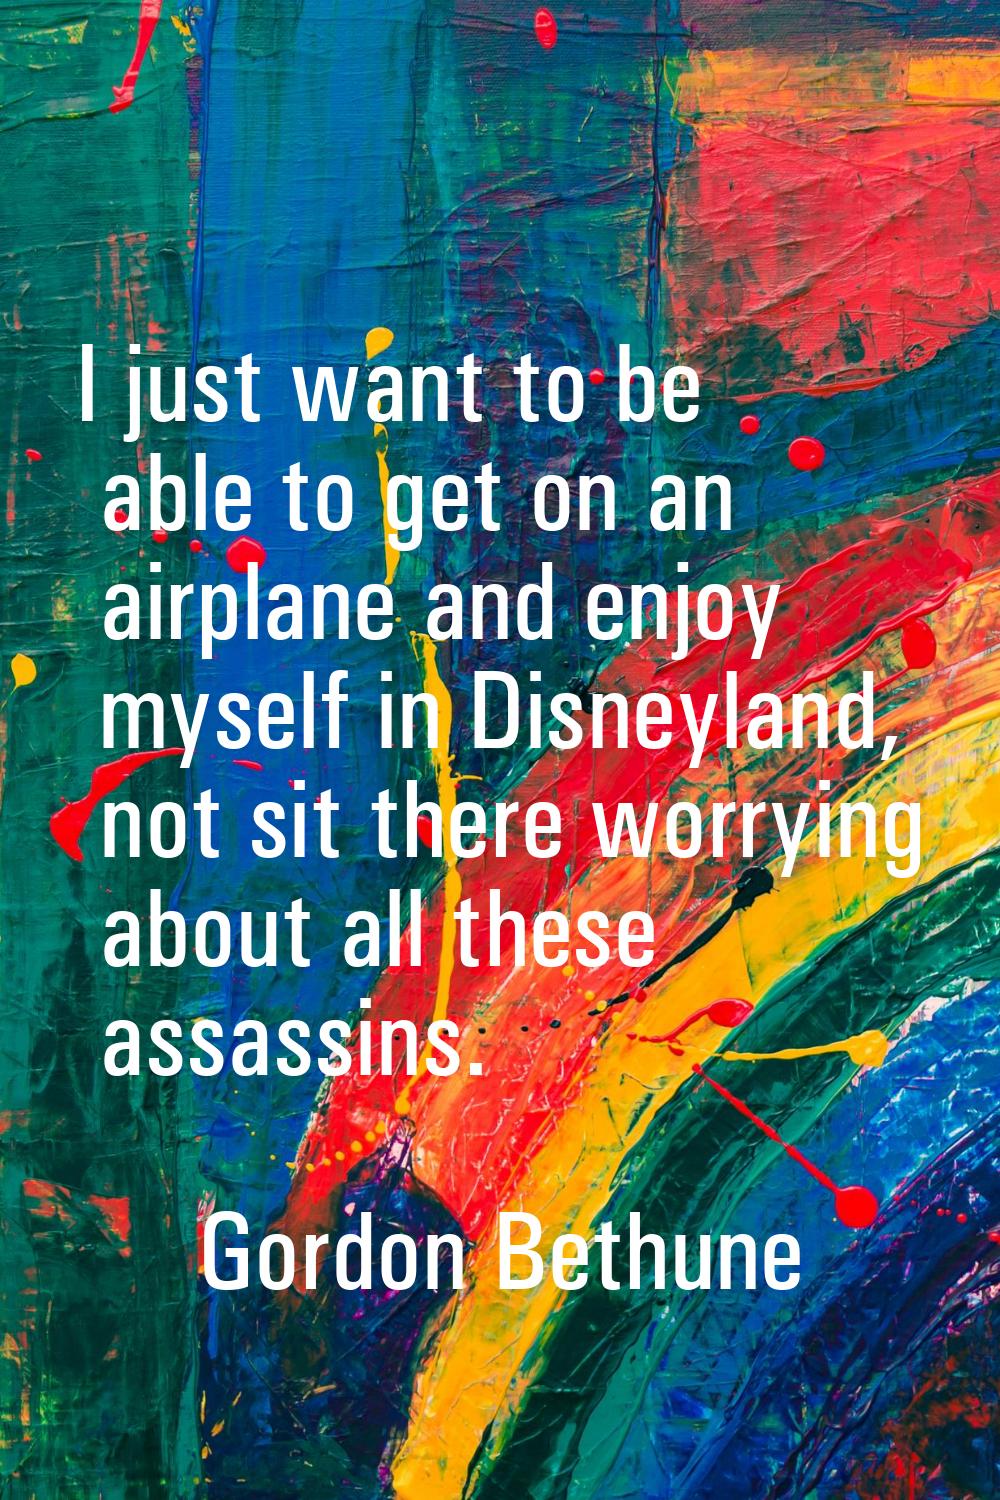 I just want to be able to get on an airplane and enjoy myself in Disneyland, not sit there worrying